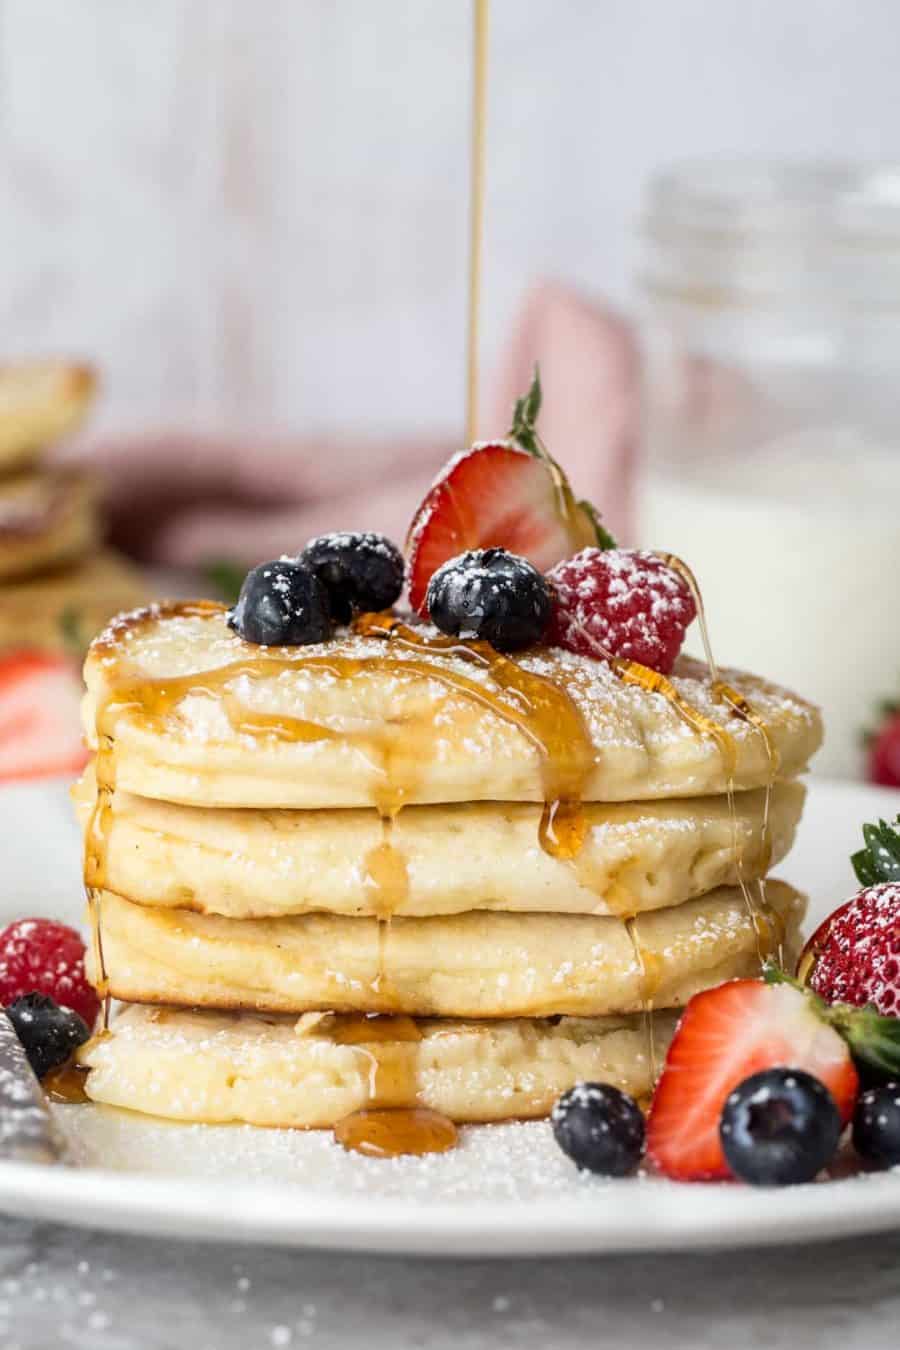 Pancake Perfection: Tips And Tricks For Flawless Homemade Pancakes